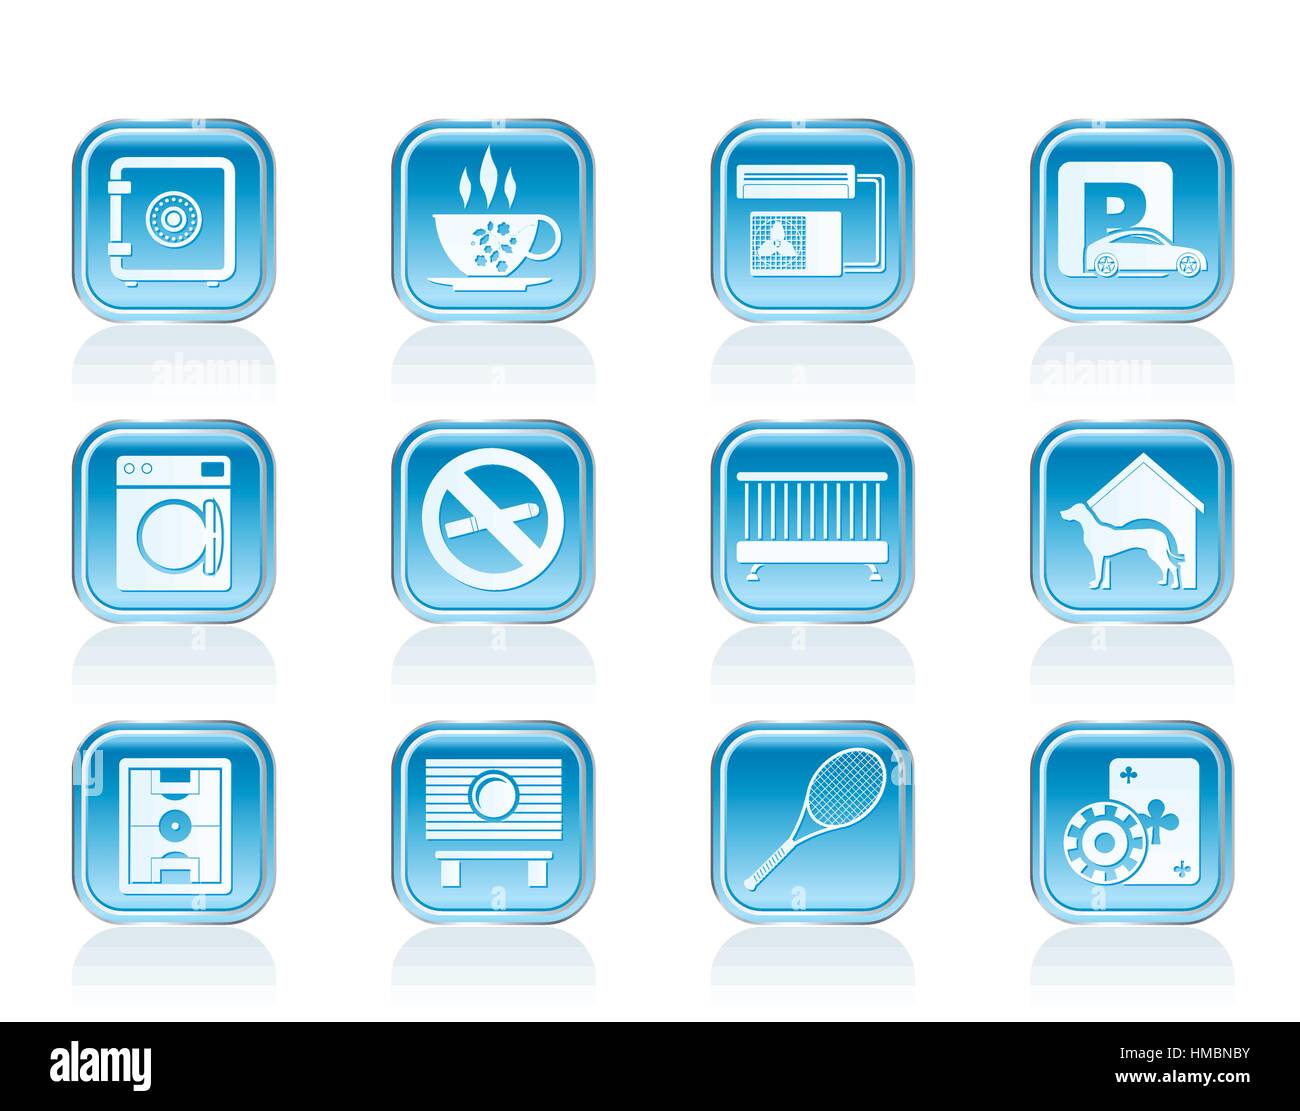 hotel and motel amenity icons Stock Vector